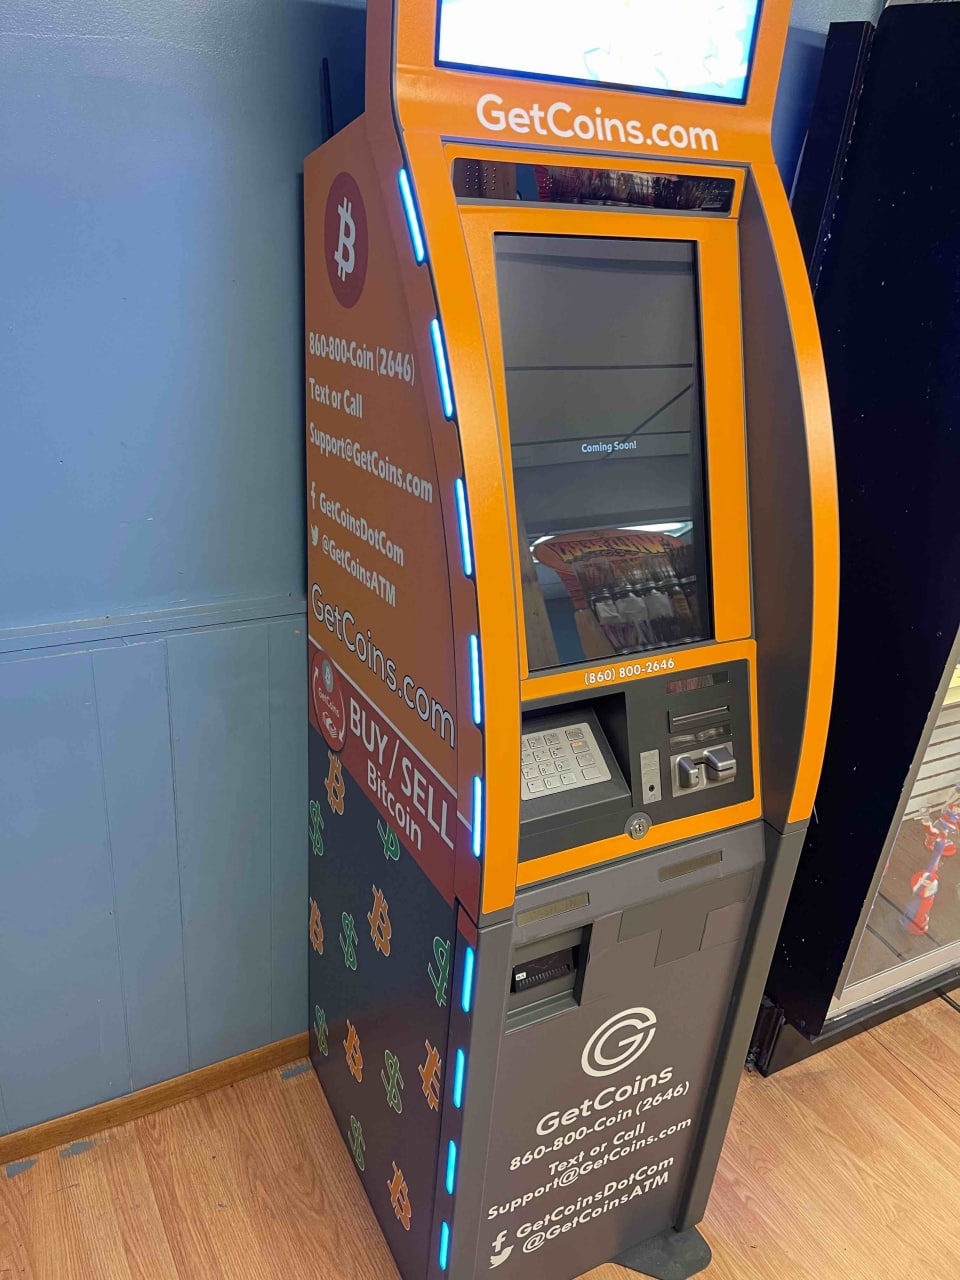 Getcoins - Bitcoin ATM - Inside of Tobacco Gifts & Accessories in Billings, Montana